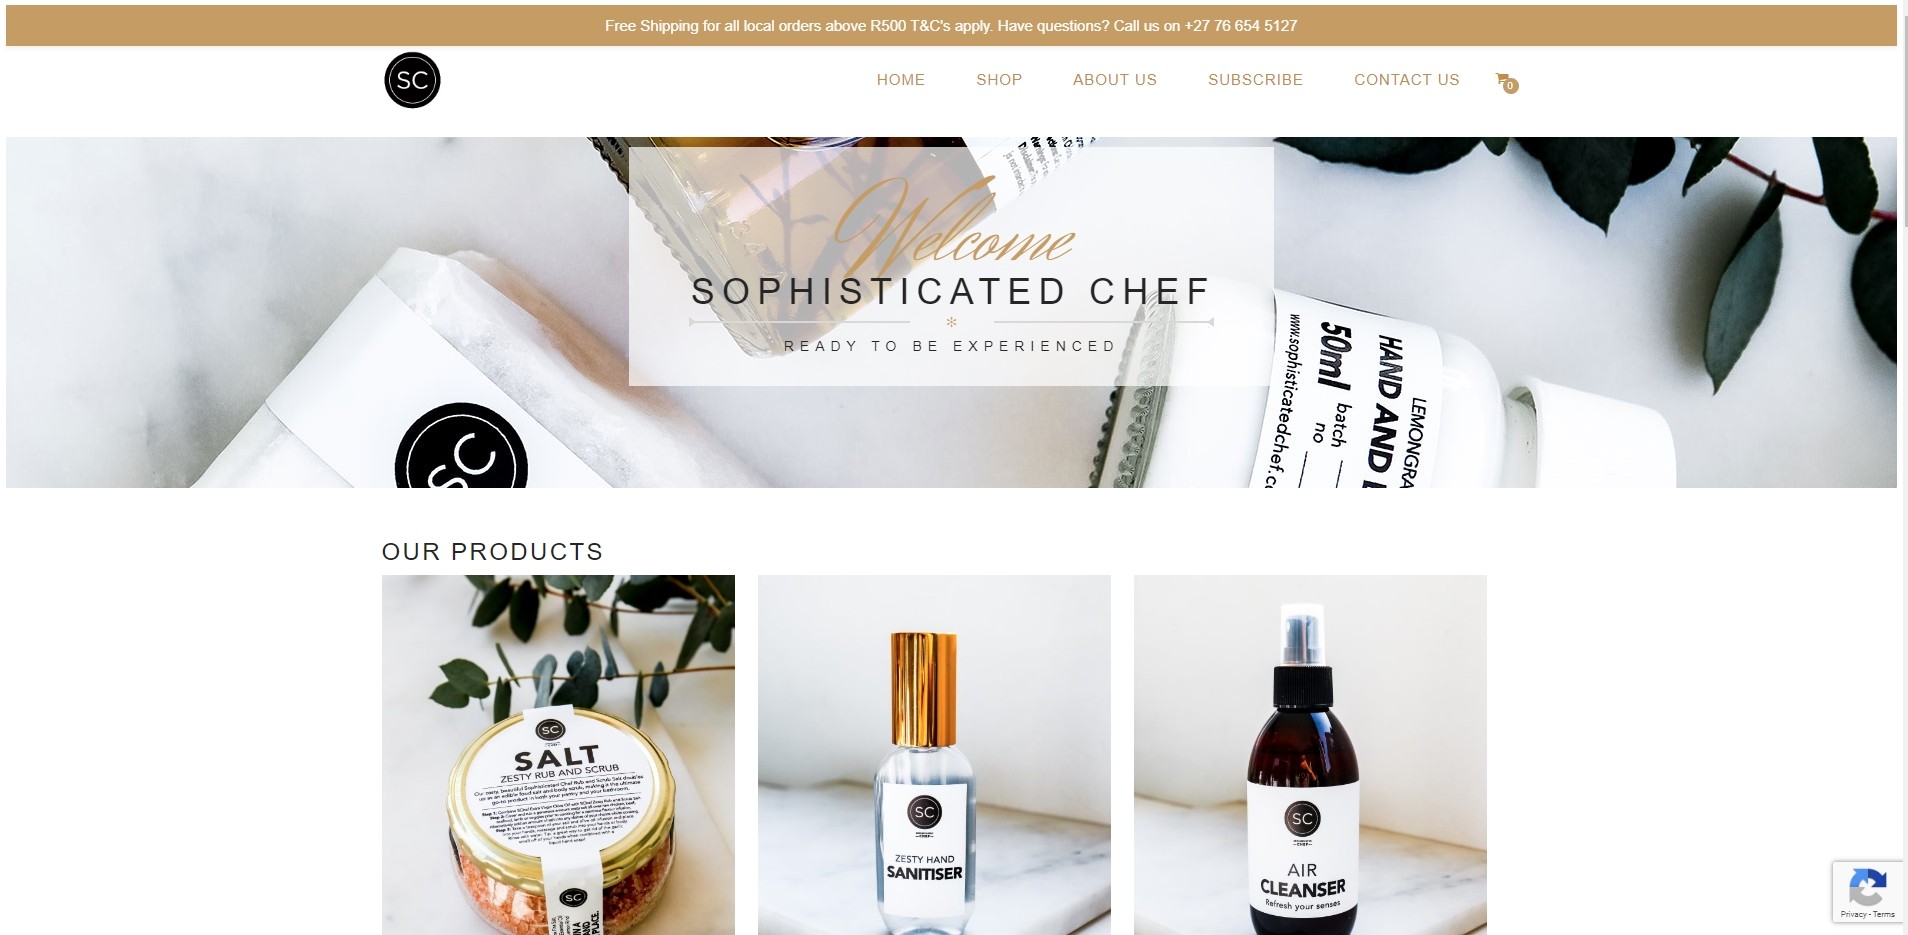 Sophisticated Chef Shop Refresh